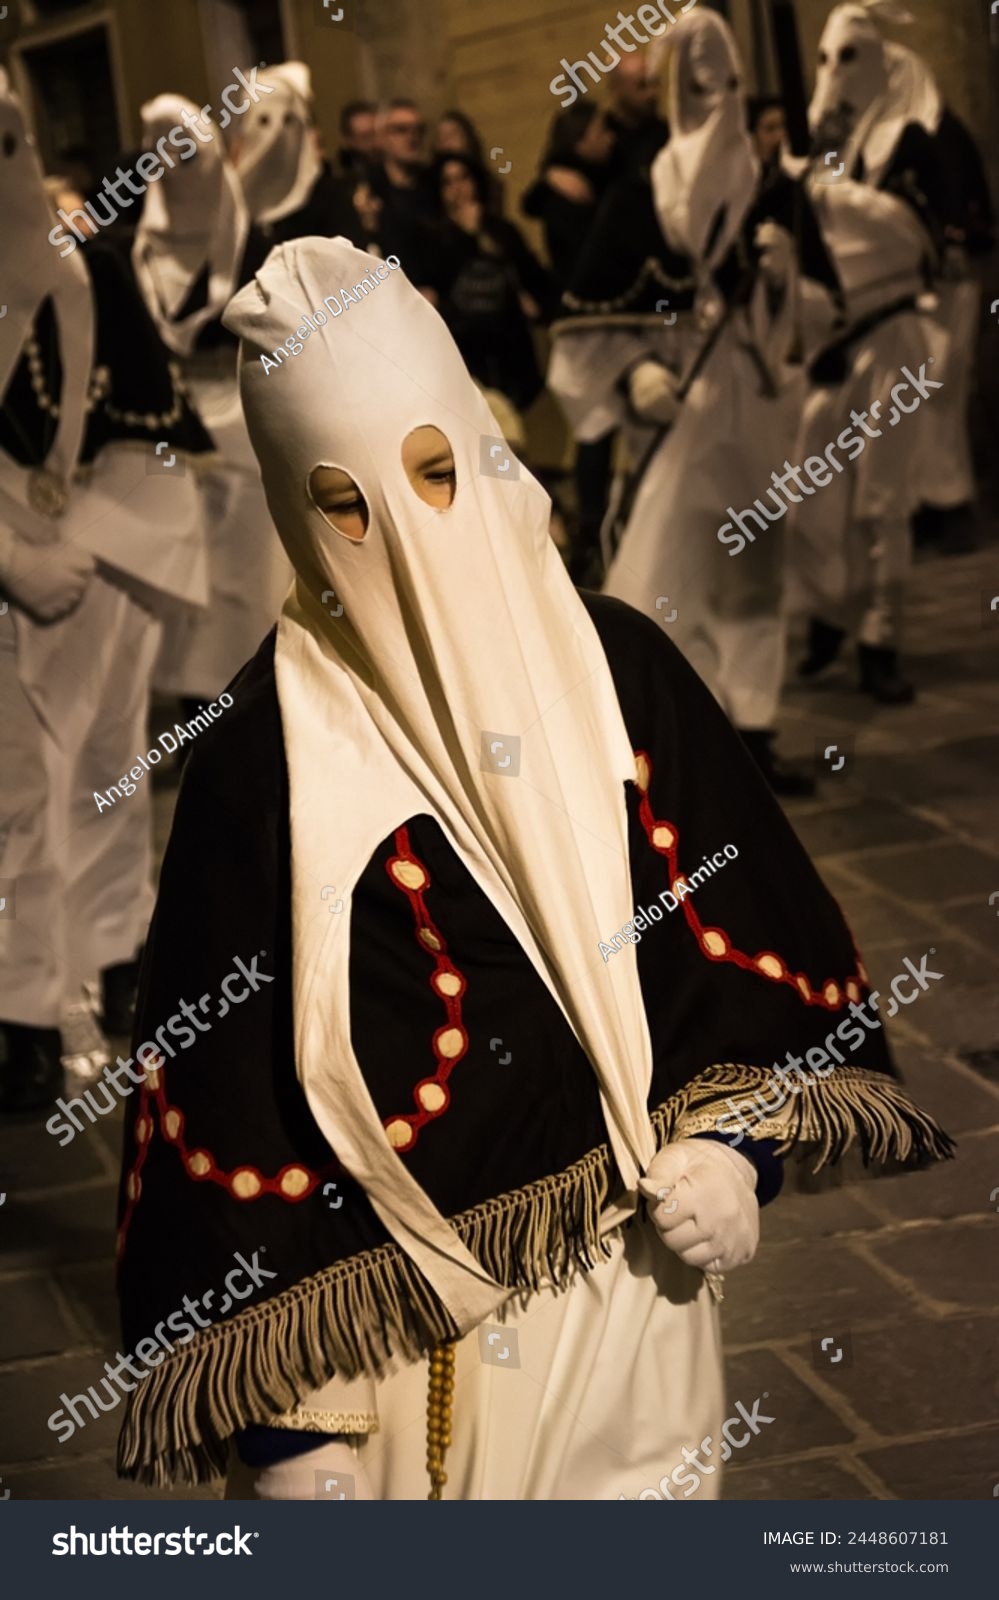 Hooded penitents during the famous Good Friday procession in Chieti (Italy) with their hoods pulled #2448607181